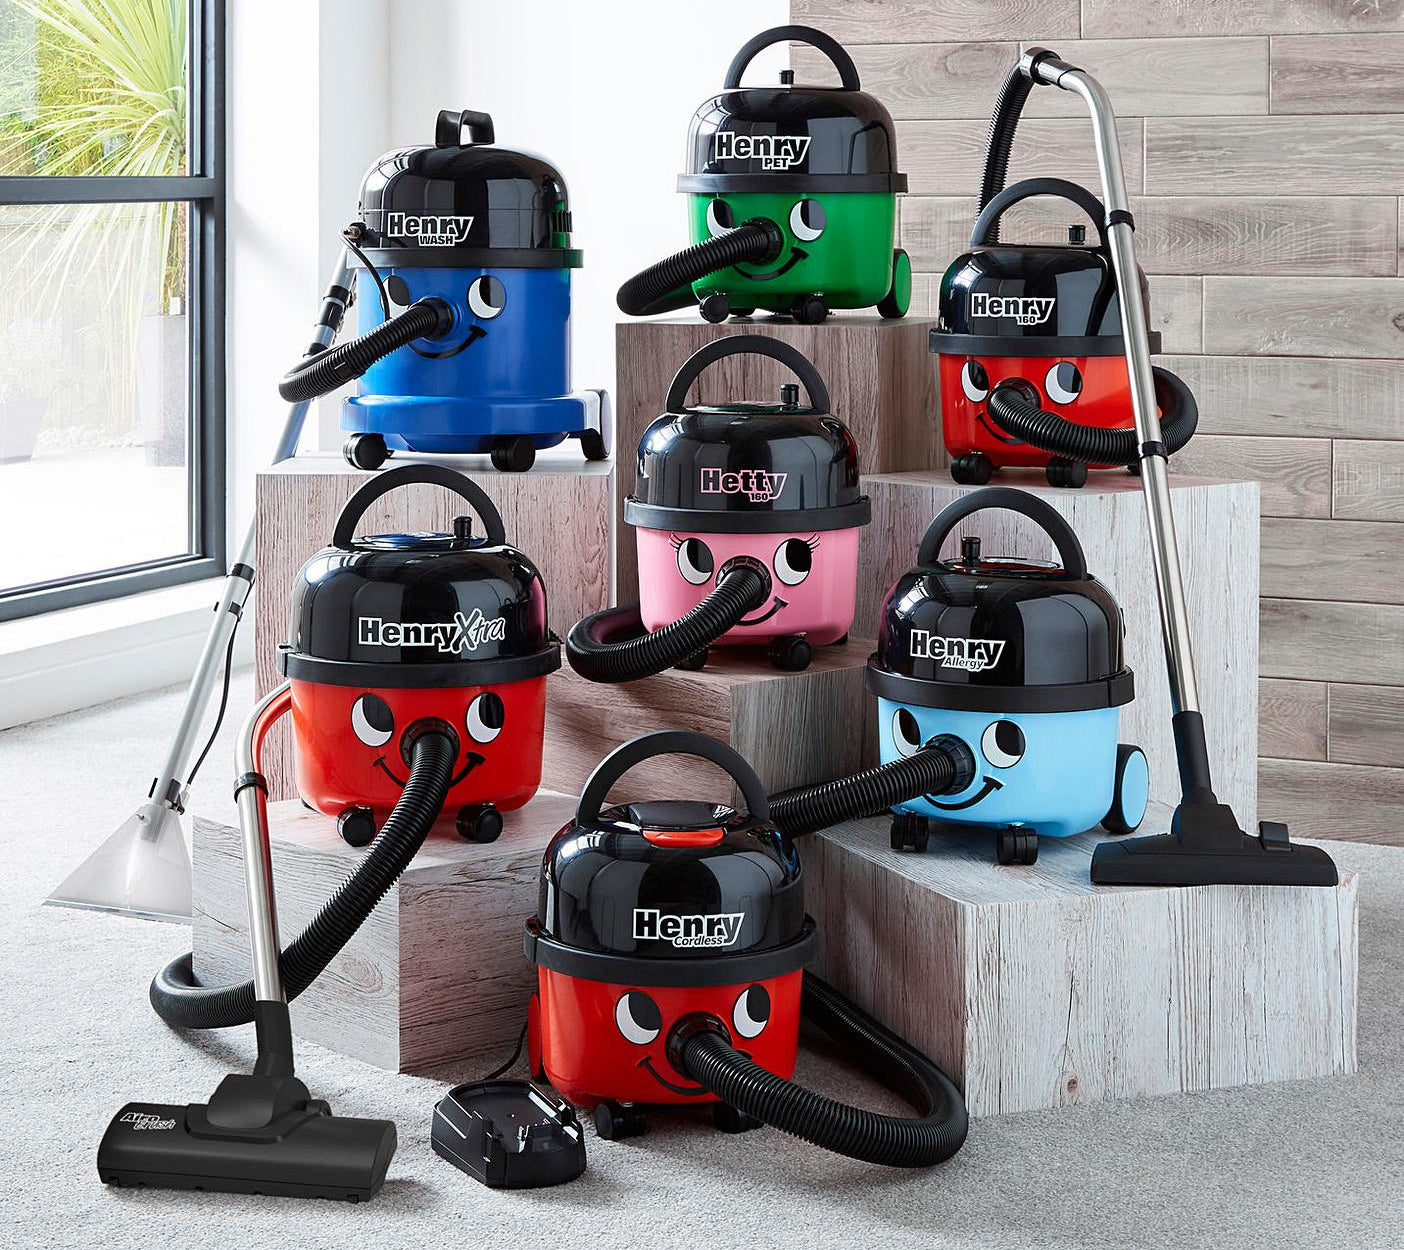 henry-hoover-bags-henry-hoover-parts